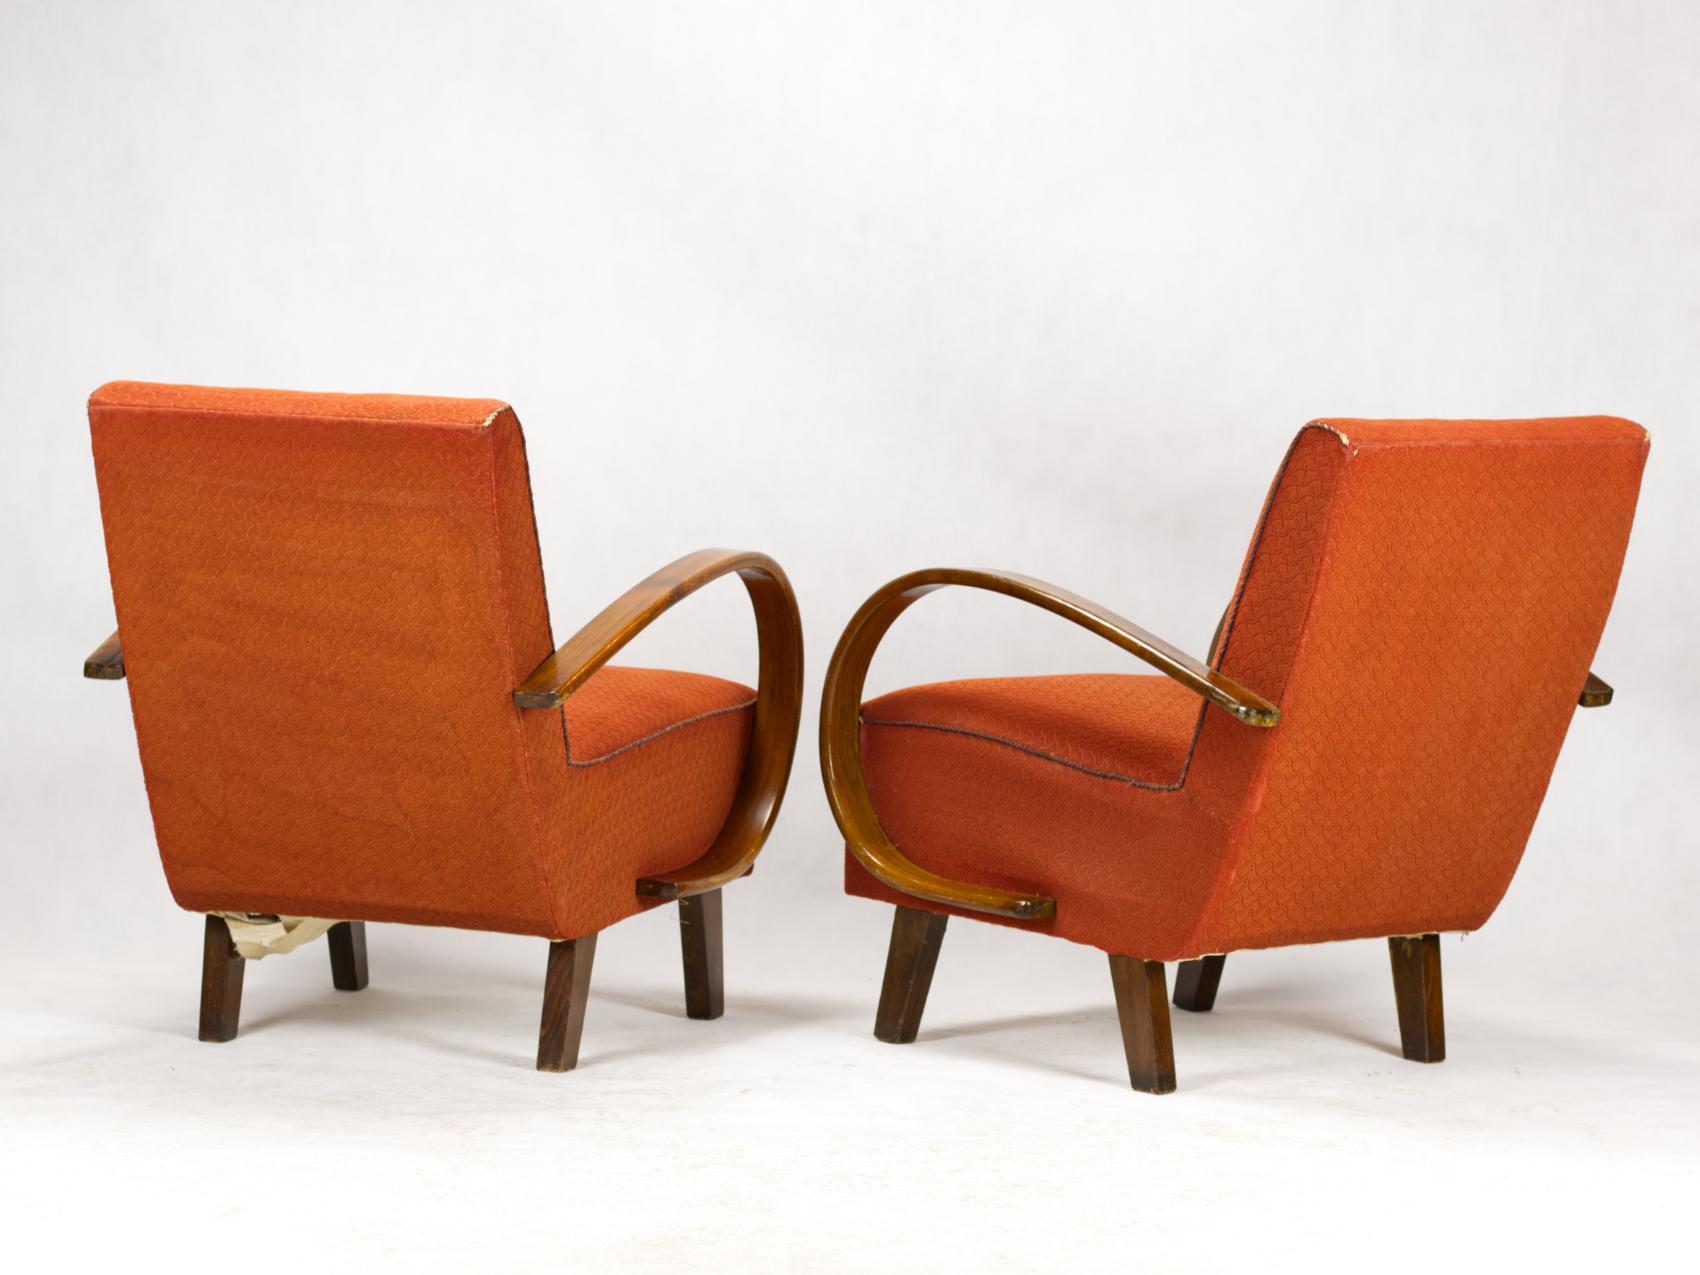 Bentwood Art Deco Lounge Chairs by Jindrich Halabala for UP Zavody Brno, 1930s